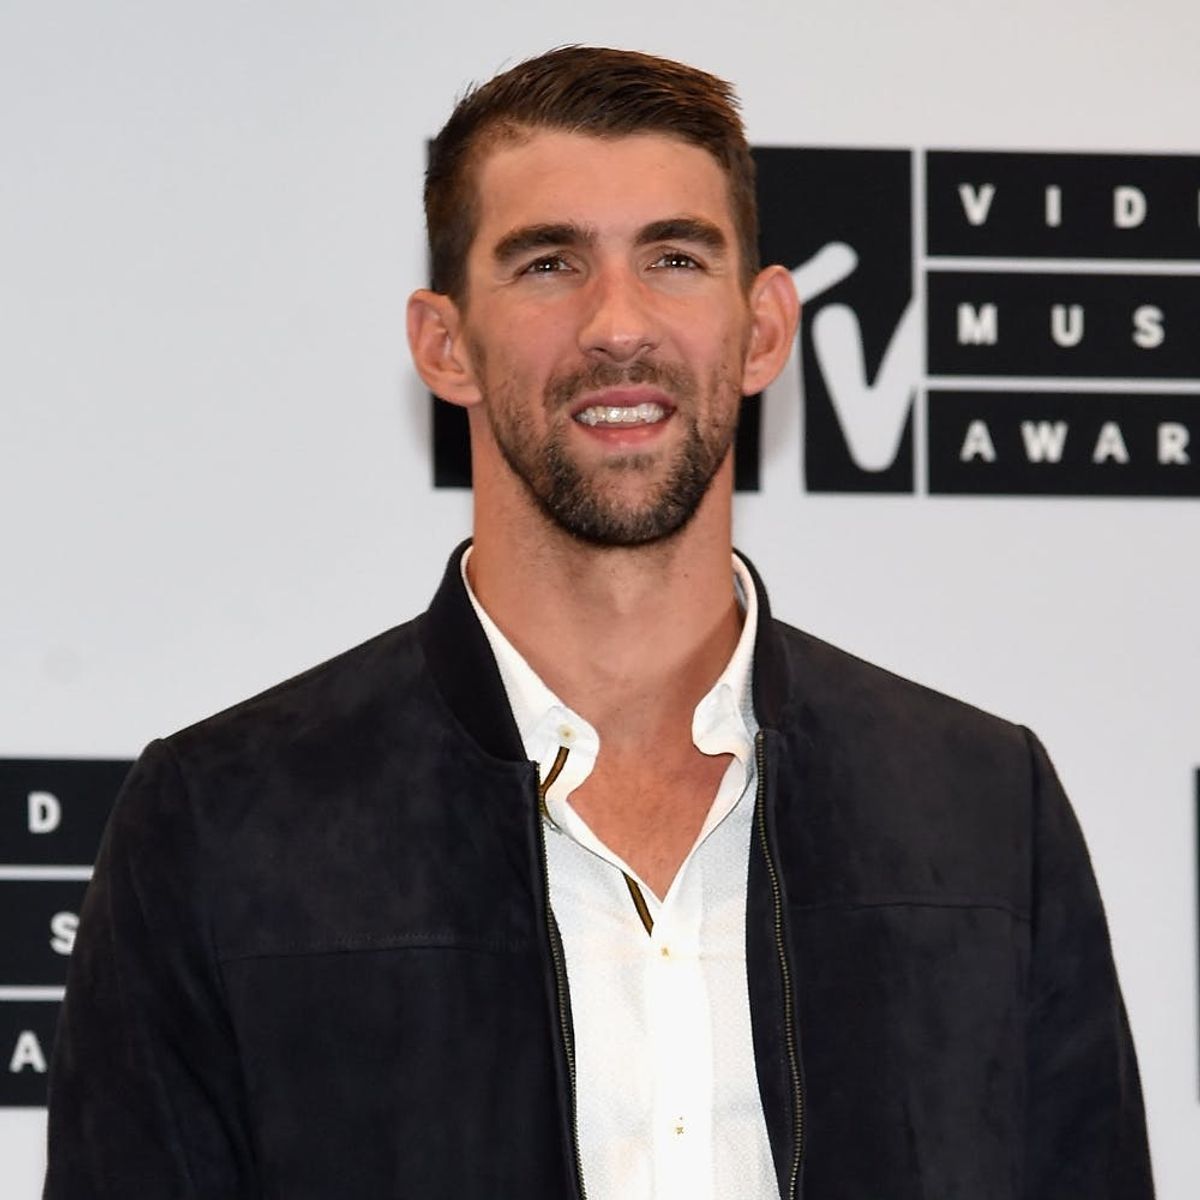 Michael Phelps Deserves a Medal for His Lip Syncing of Eminem’s “Lose Yourself”